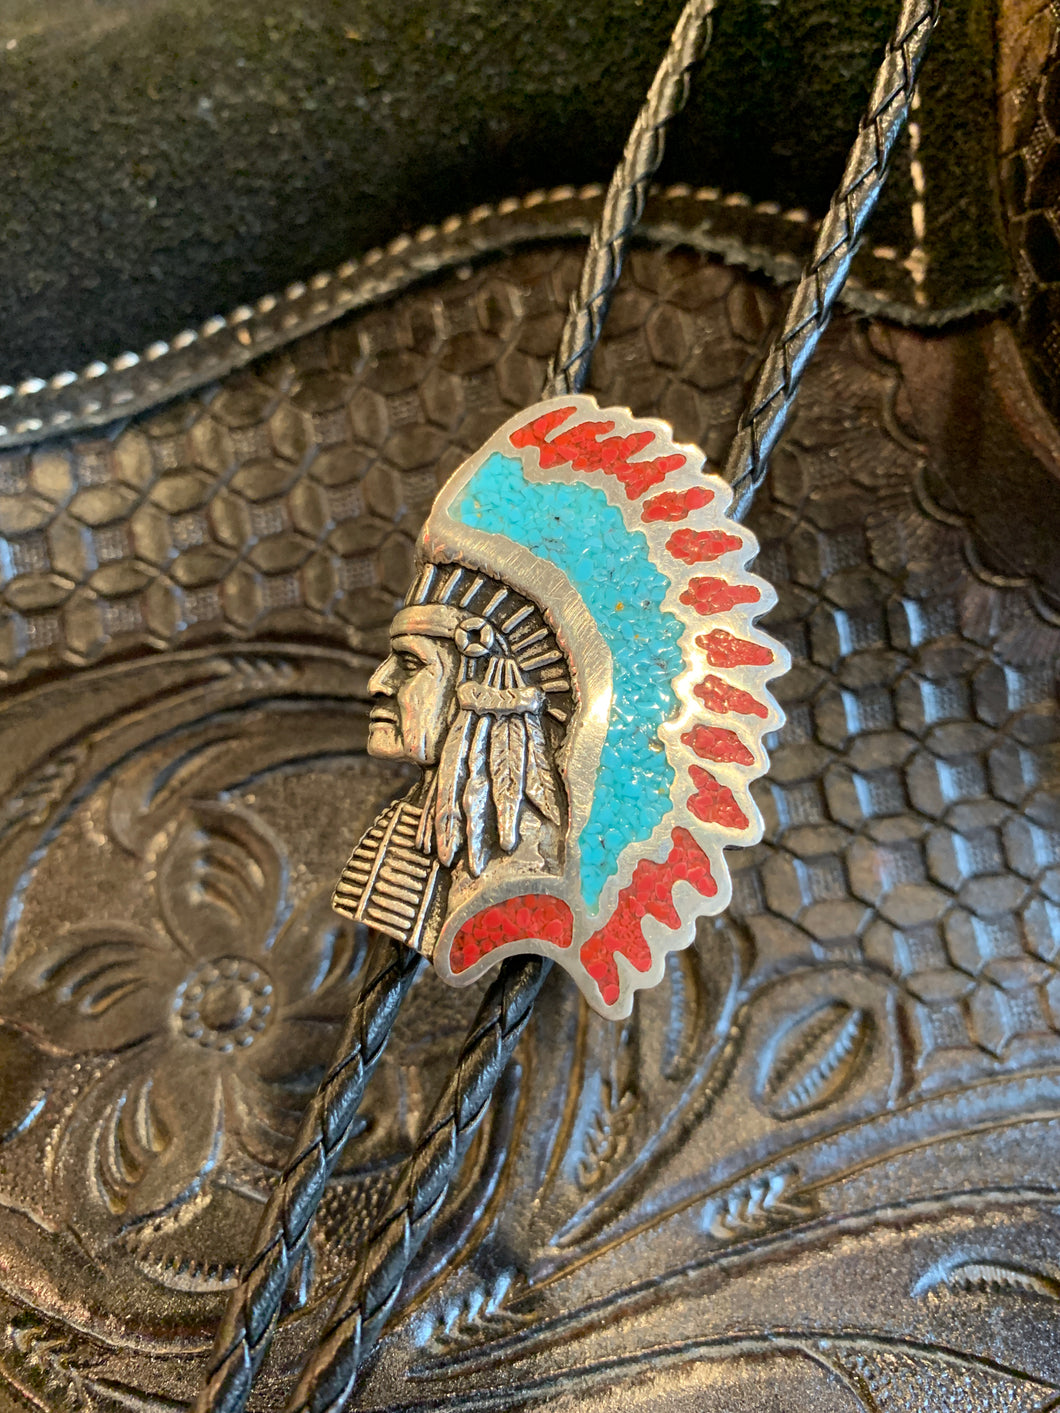 BT267 Indian Chief Bolo Tie Inlaid with Silver Tips. USA Import